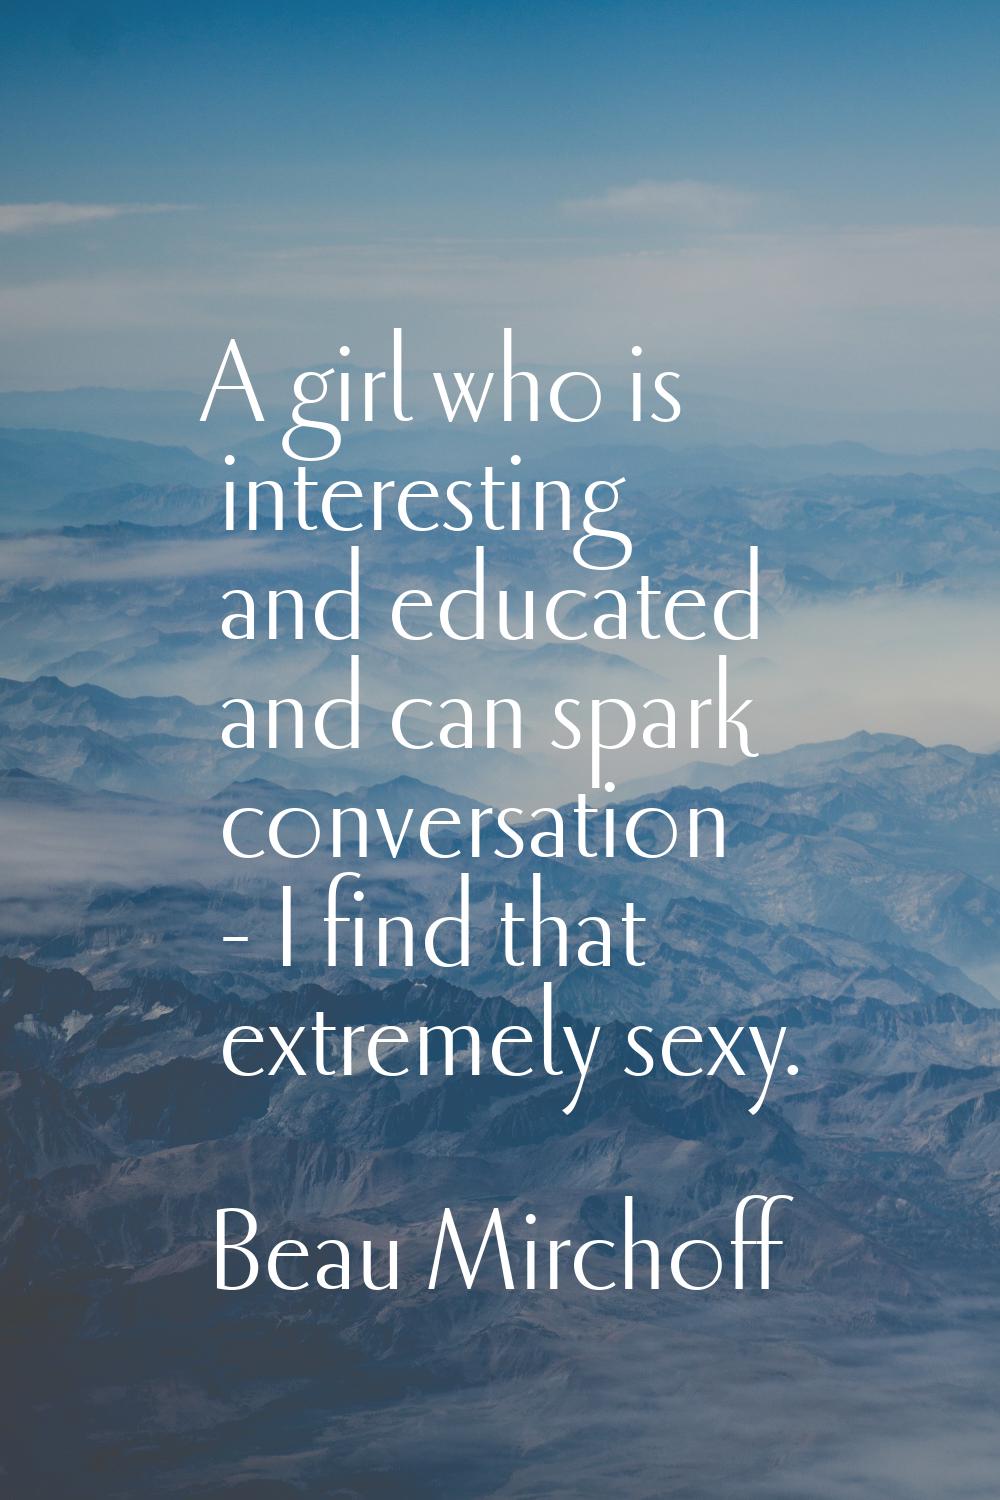 A girl who is interesting and educated and can spark conversation - I find that extremely sexy.